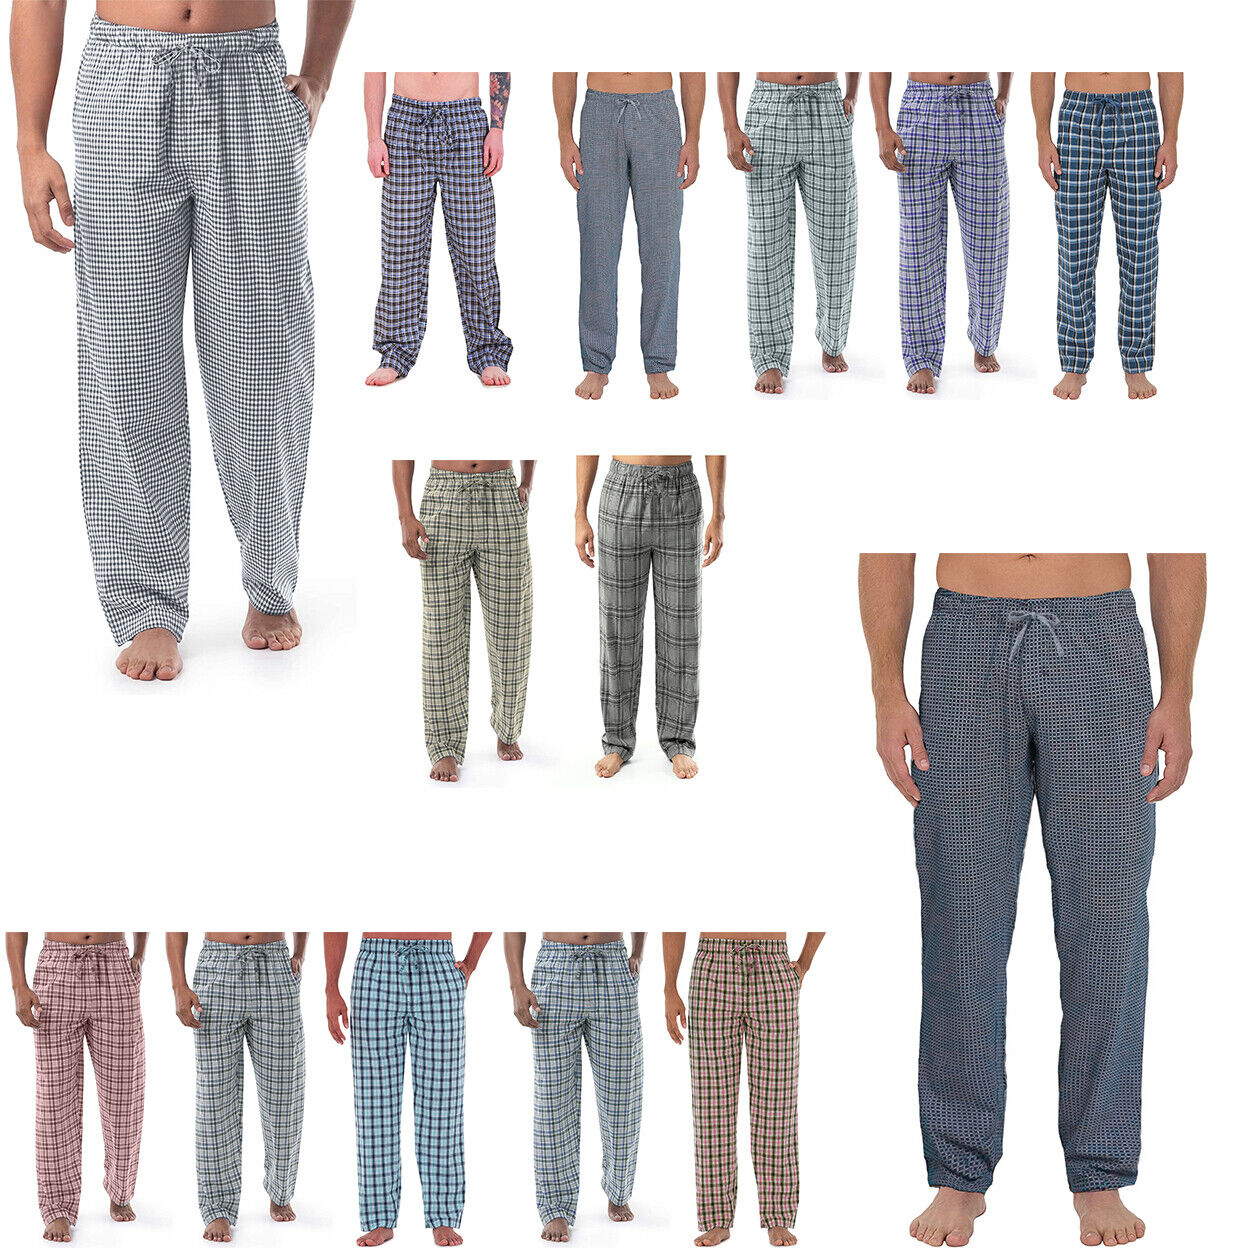 3-Pack: Men's Ultra-Soft Solid & Plaid Cotton Jersey Knit Comfy Sleep Lounge Pajama Pants - Solid, X-large